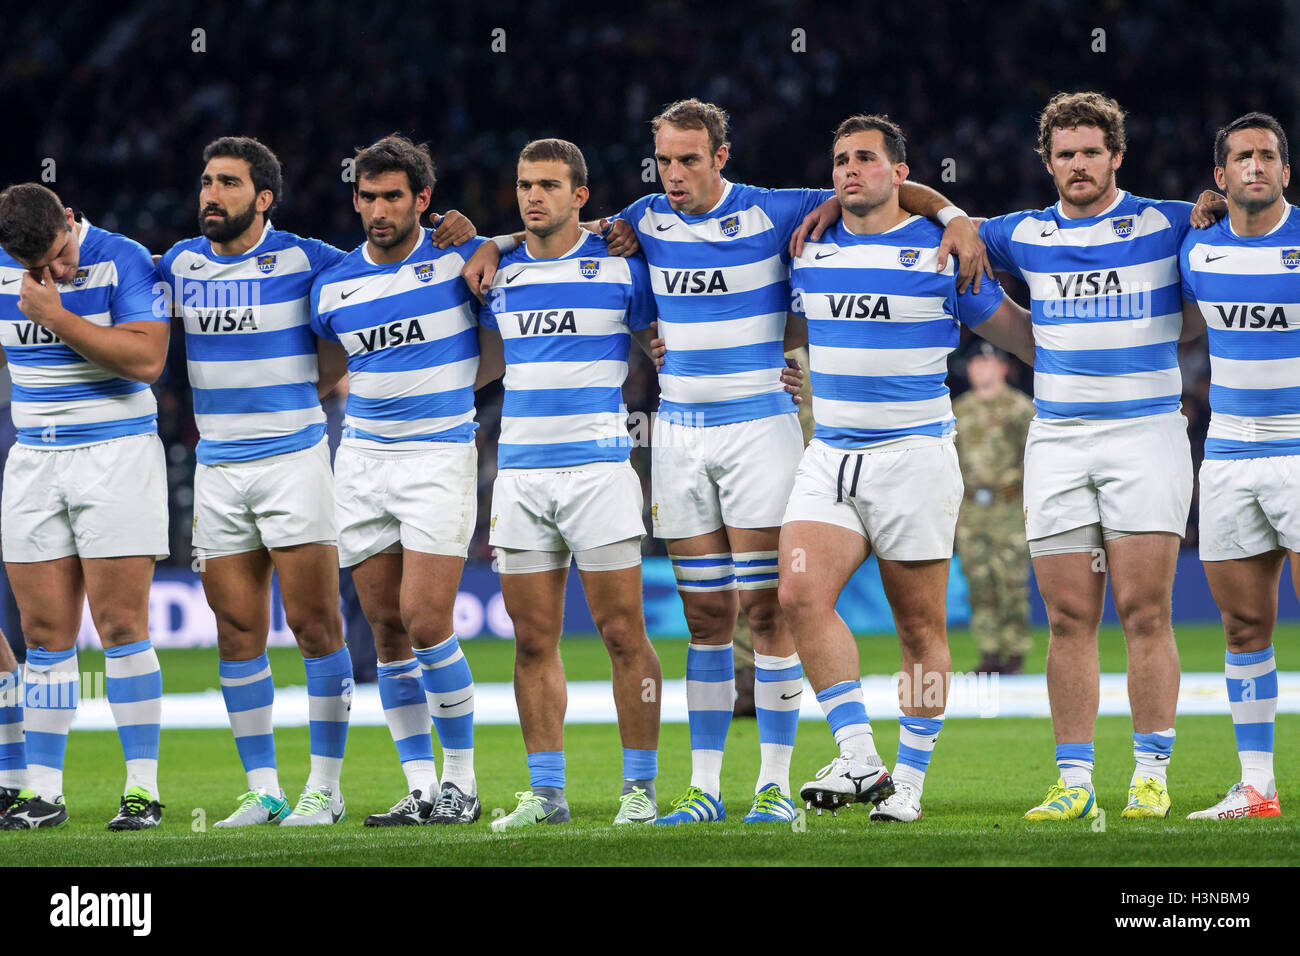 The Argentinian Pumas lineup for the national anthem before the Rugby Championship rugby union test match between Argentian Pumas and Australian Wallabies. Australia won the first match 33-21 at Twickenham Stadium in London, United Kingdom. 08 October, 2016. © Hugh Peterswald/Alamy Live News Stock Photo